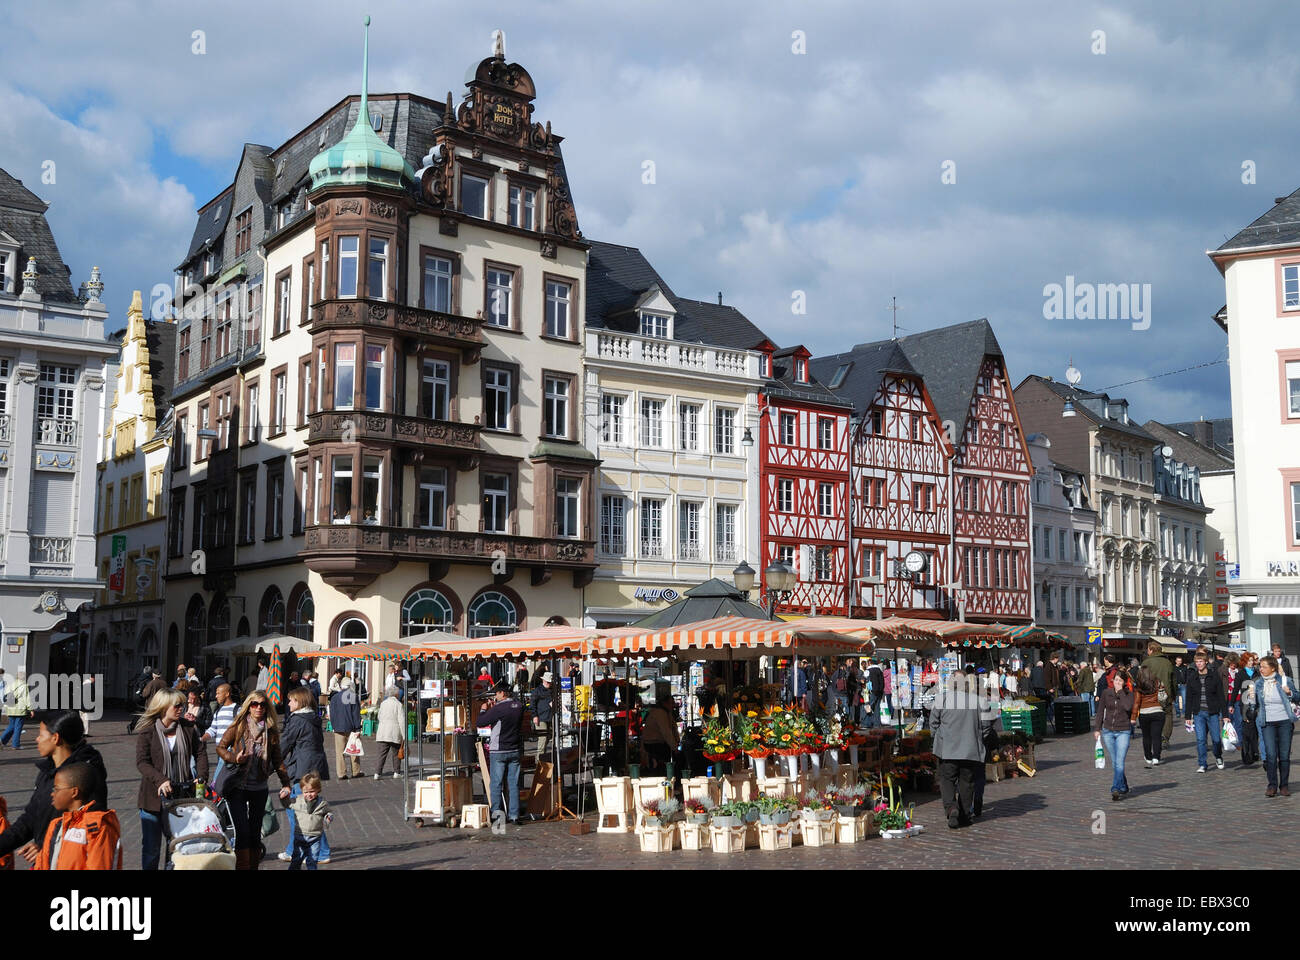 principal market with flower stands and timber-framed houses, Germany, Rhineland-Palatinate, Trier Stock Photo